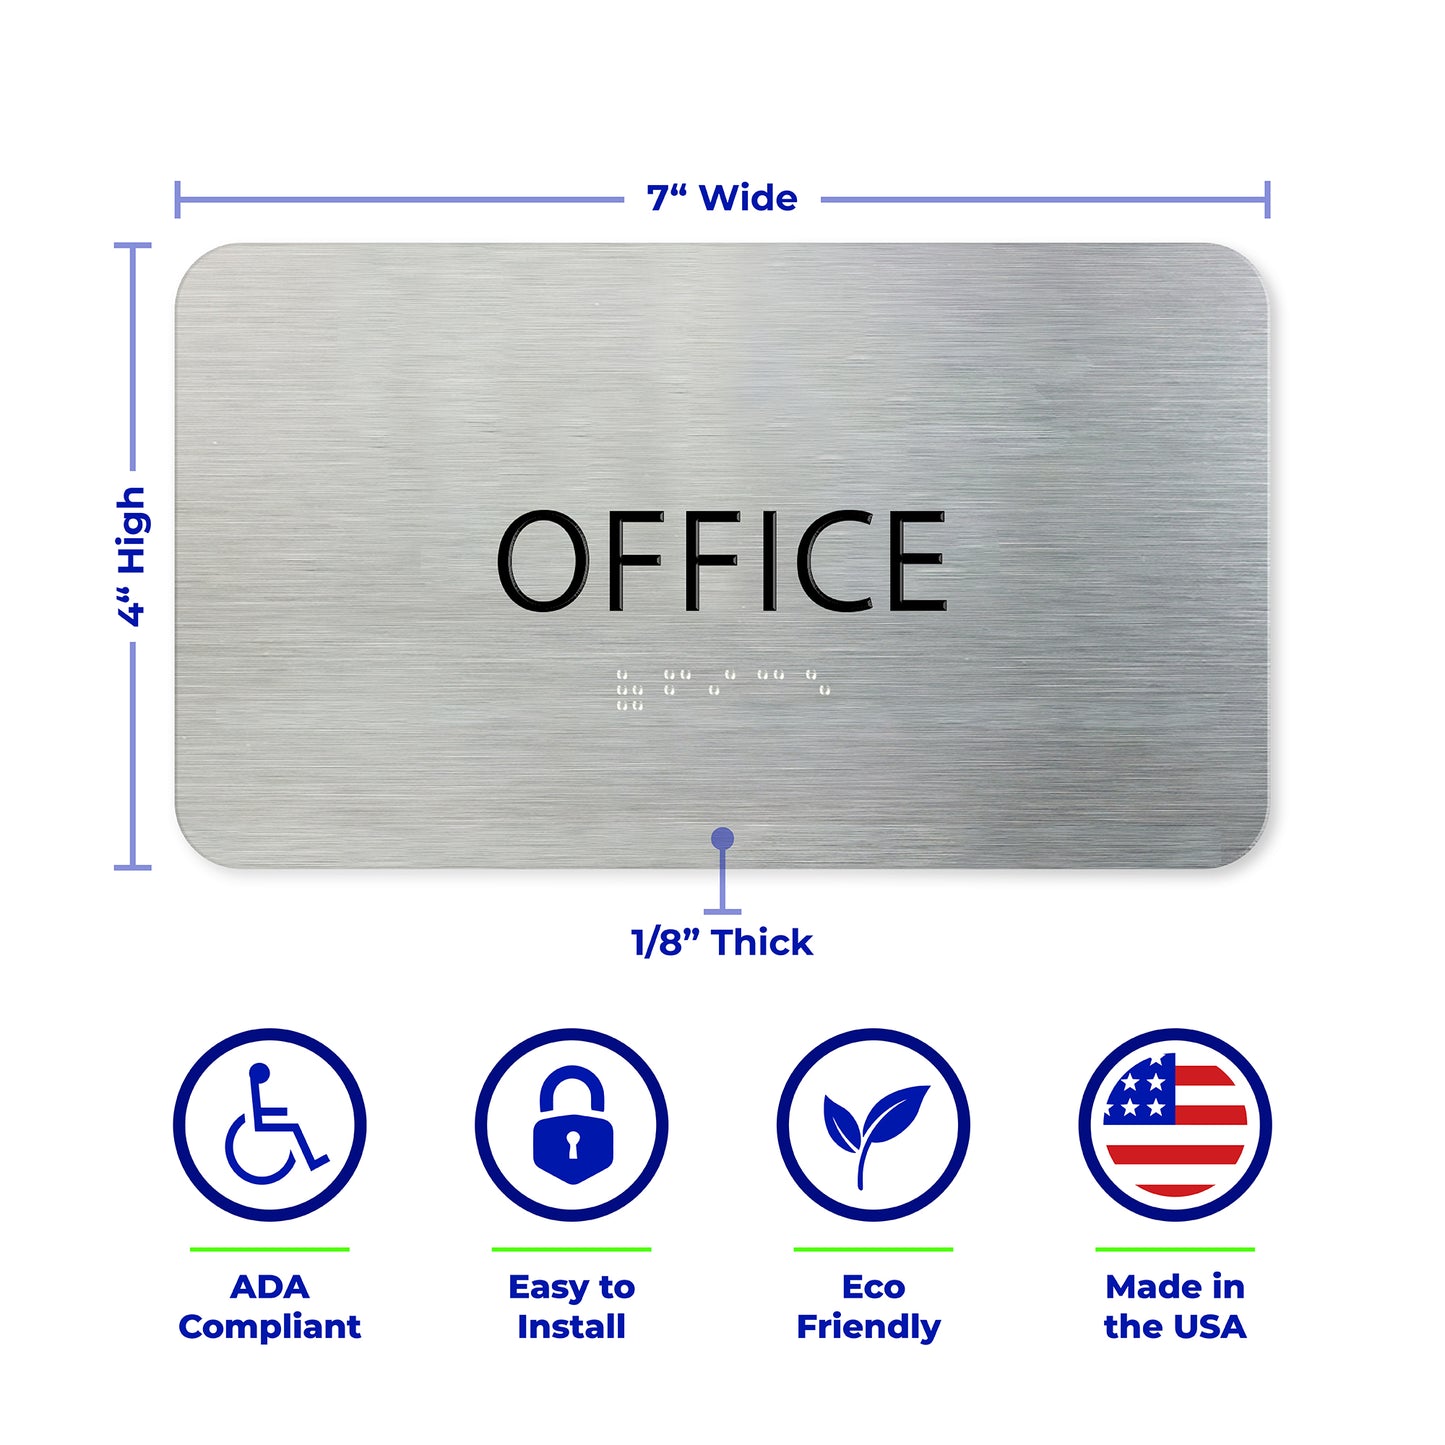 OFFICE Sign for Door, ADA Compliant, Office Door Signs, Aluminum Brushed Silver, Black Raised Text, Grade 2 Braille, 7" x 4"